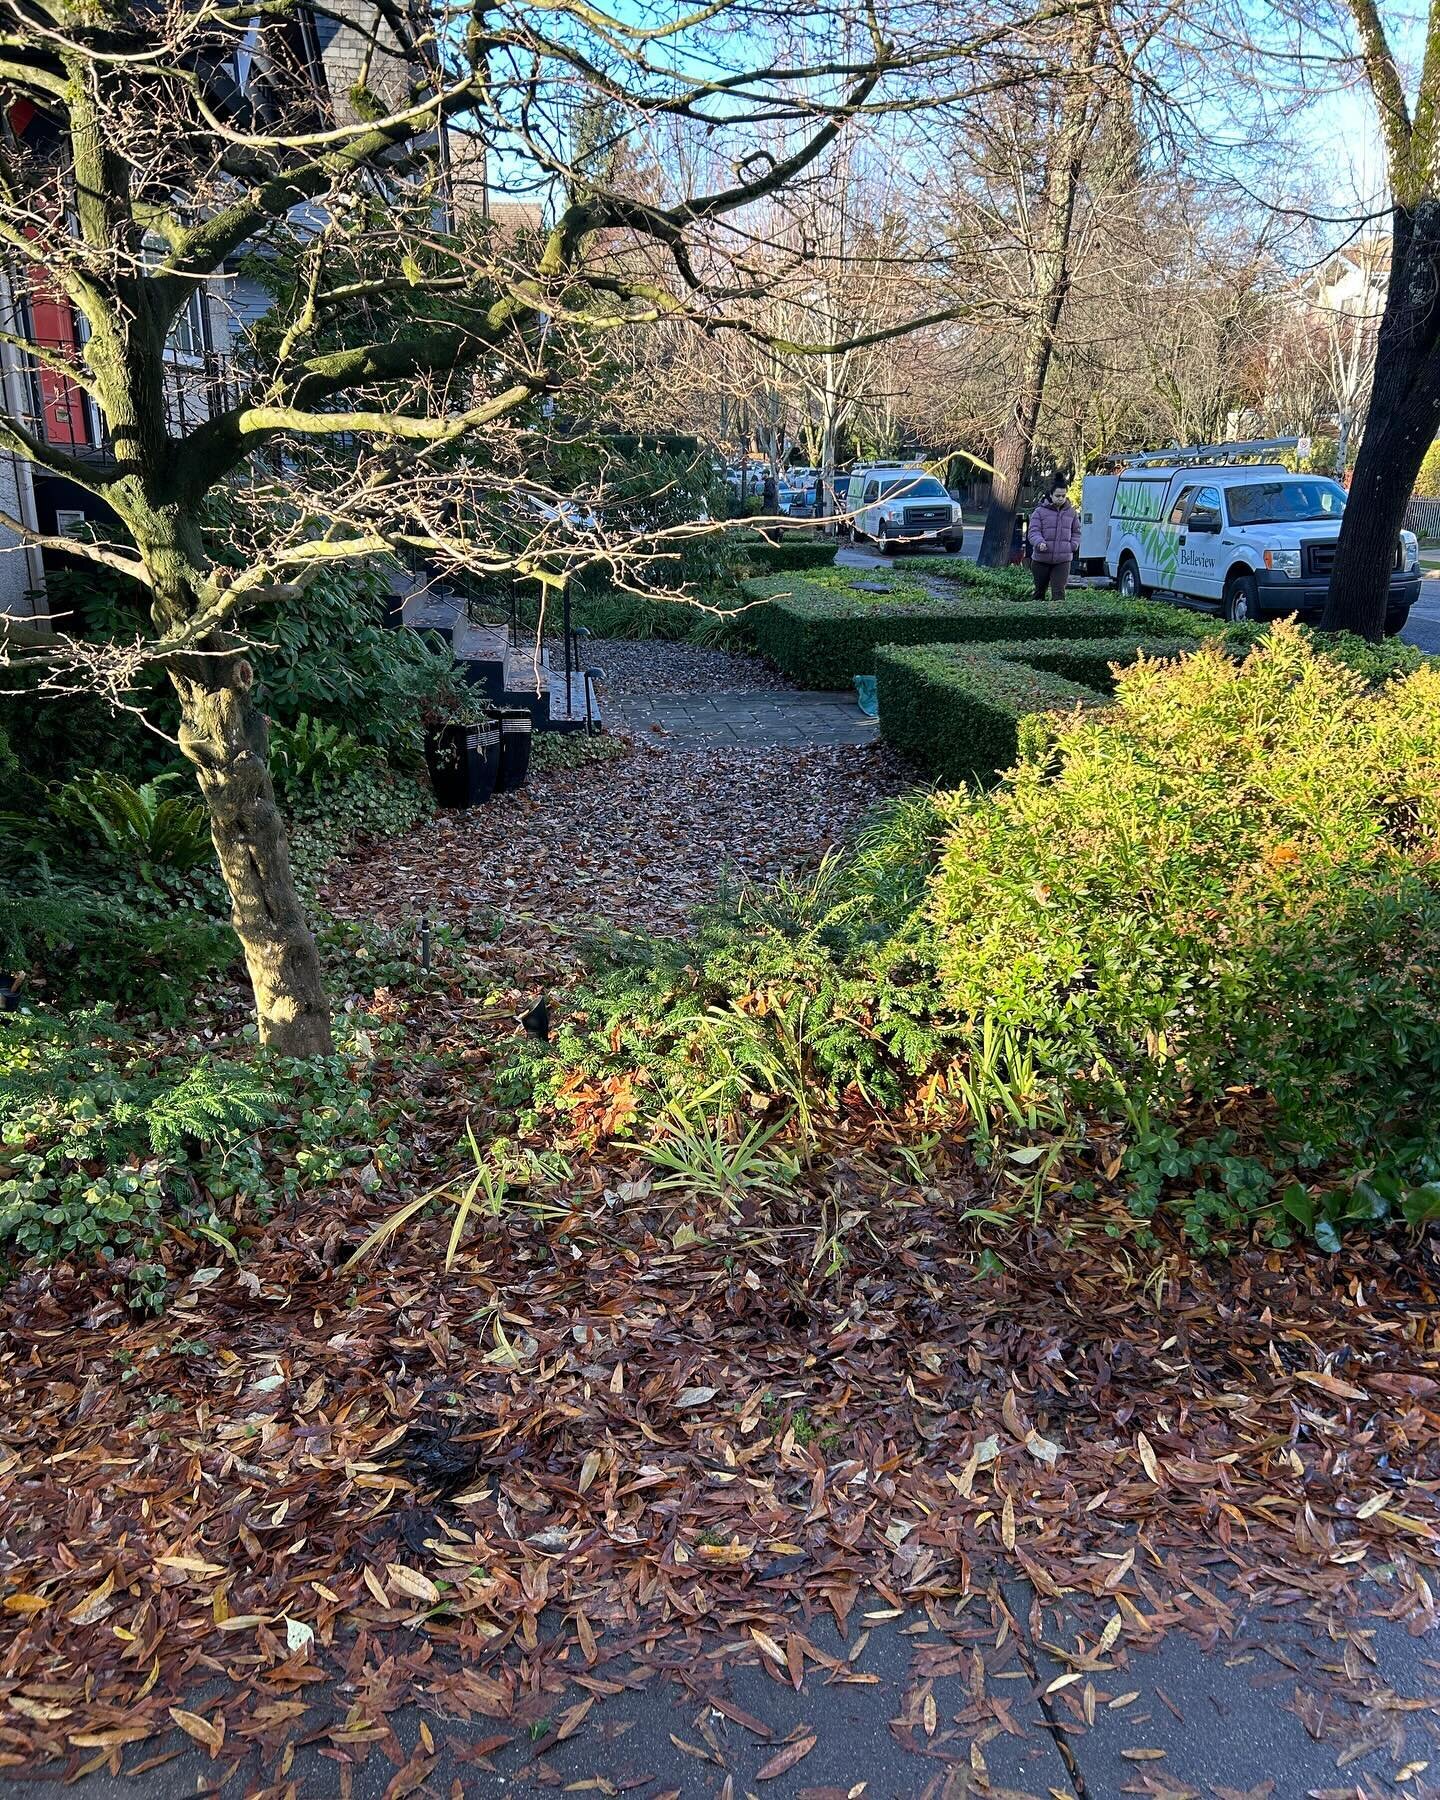 Big clean up today. For the Belleview crew. 

#leaf #leaves #clean #landscaping #northshorevancouver